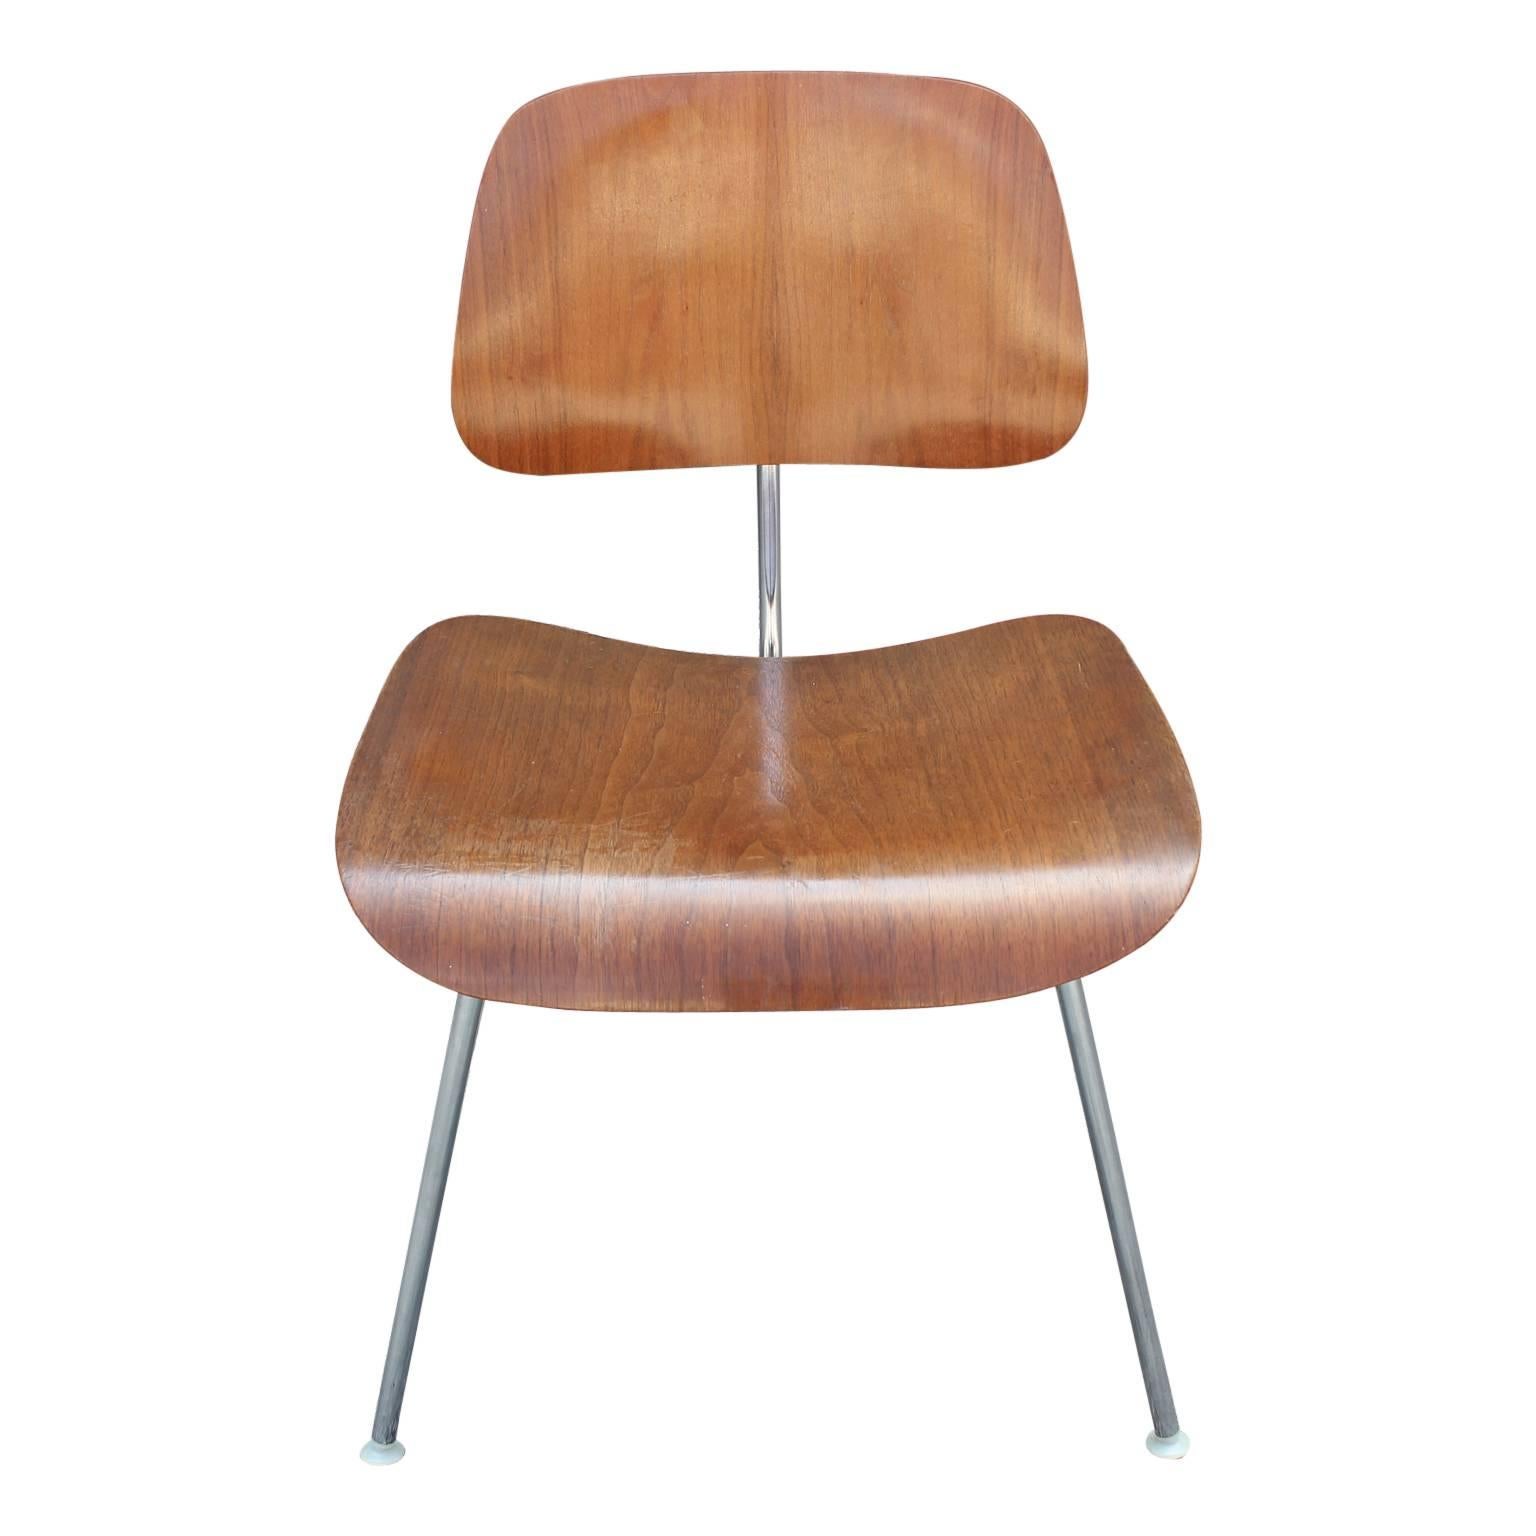 Pair of Mid-Century Modern Eames DCM dining chairs. An iconic plywood chair designed by the great Charles Eames for Herman Miller. This chair features ash plywood seat and back with steel framing.